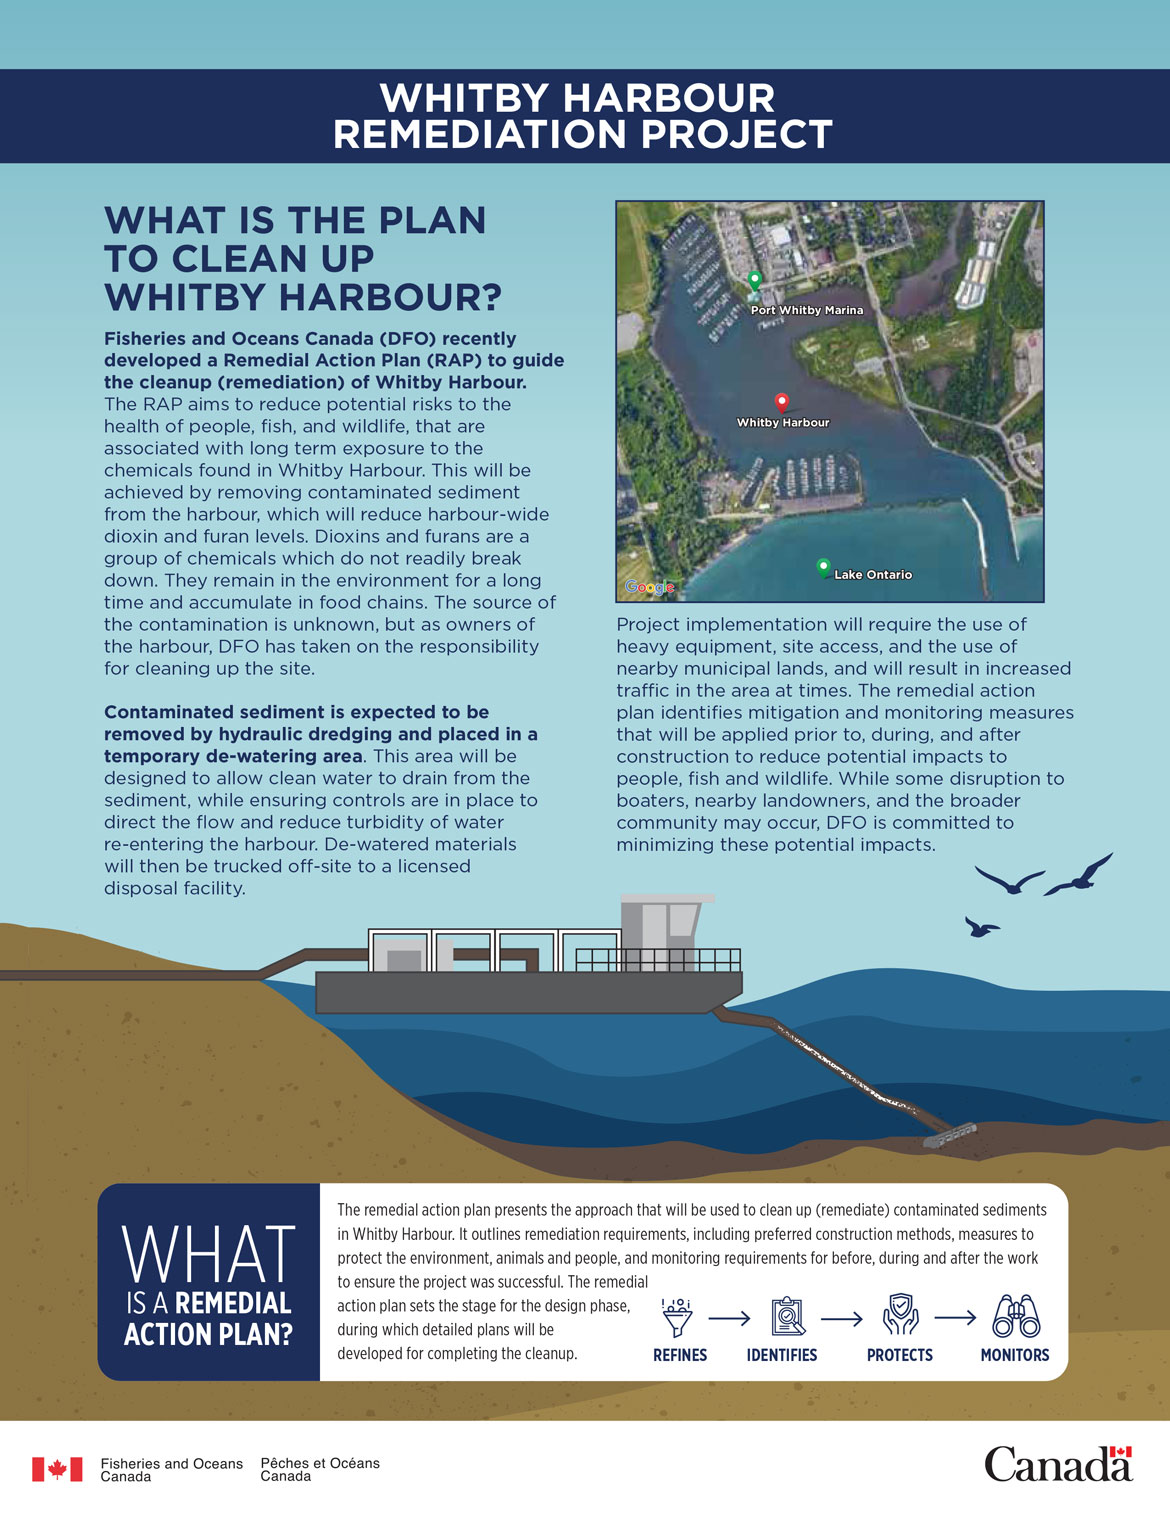 Infographic: What is the plan to clean up Whitby harbour?